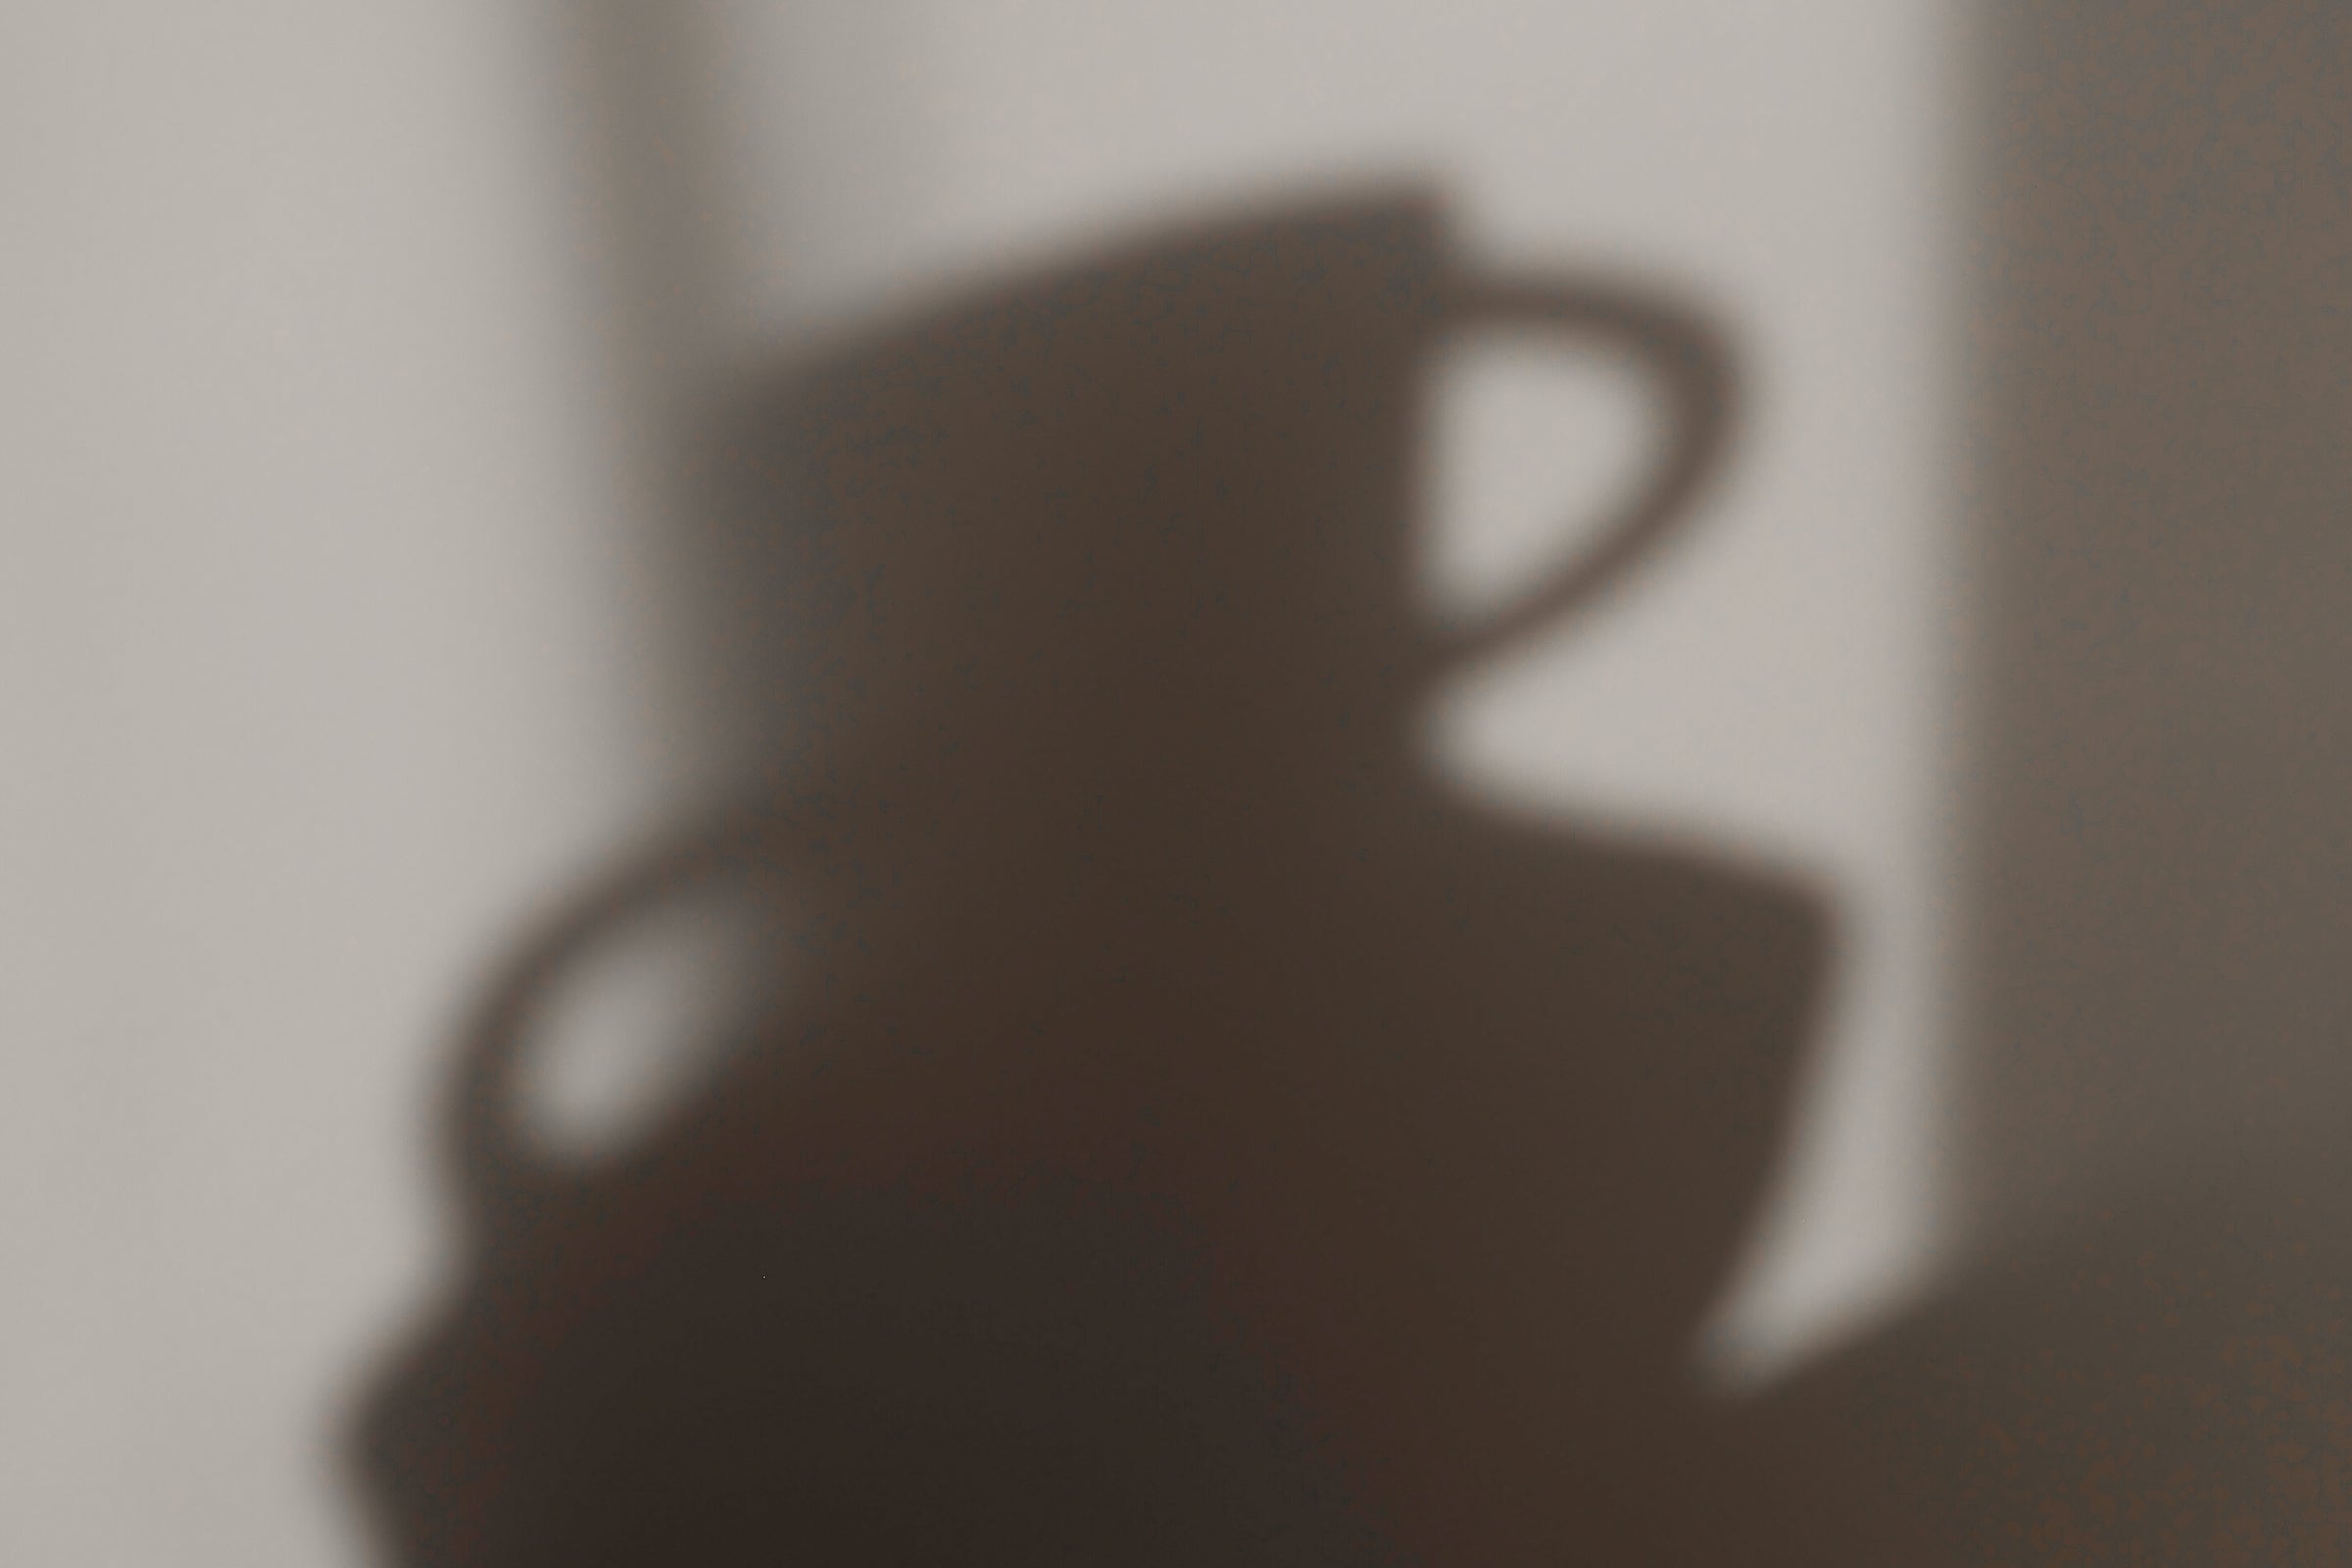 Shadow of a vase on the wall